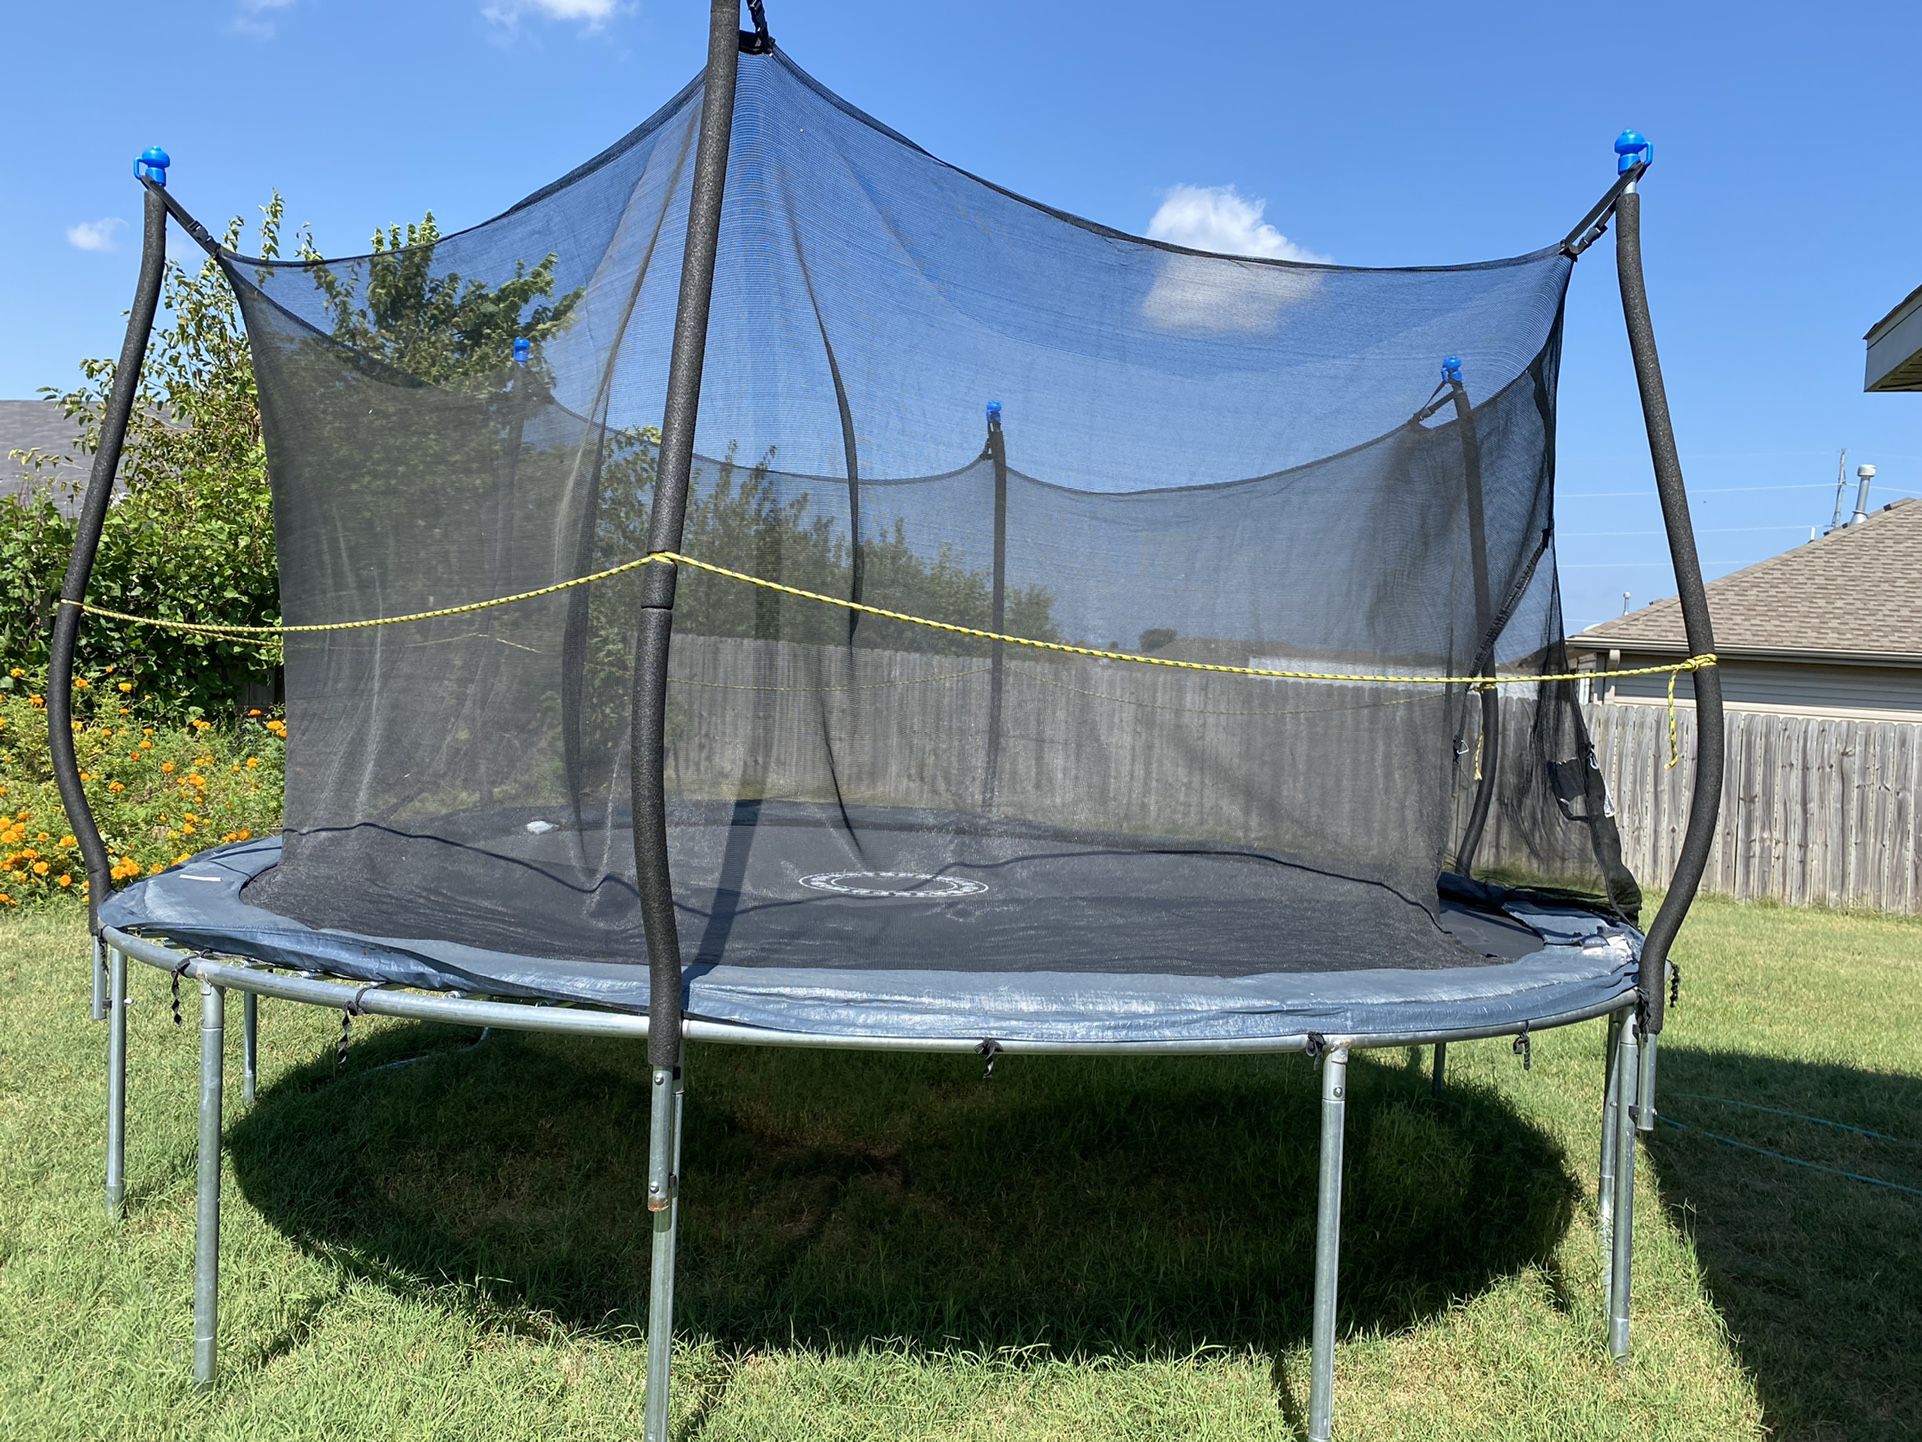 Trampoline - BouncePro Brand - 14 Ft - Used Like New - For Sale